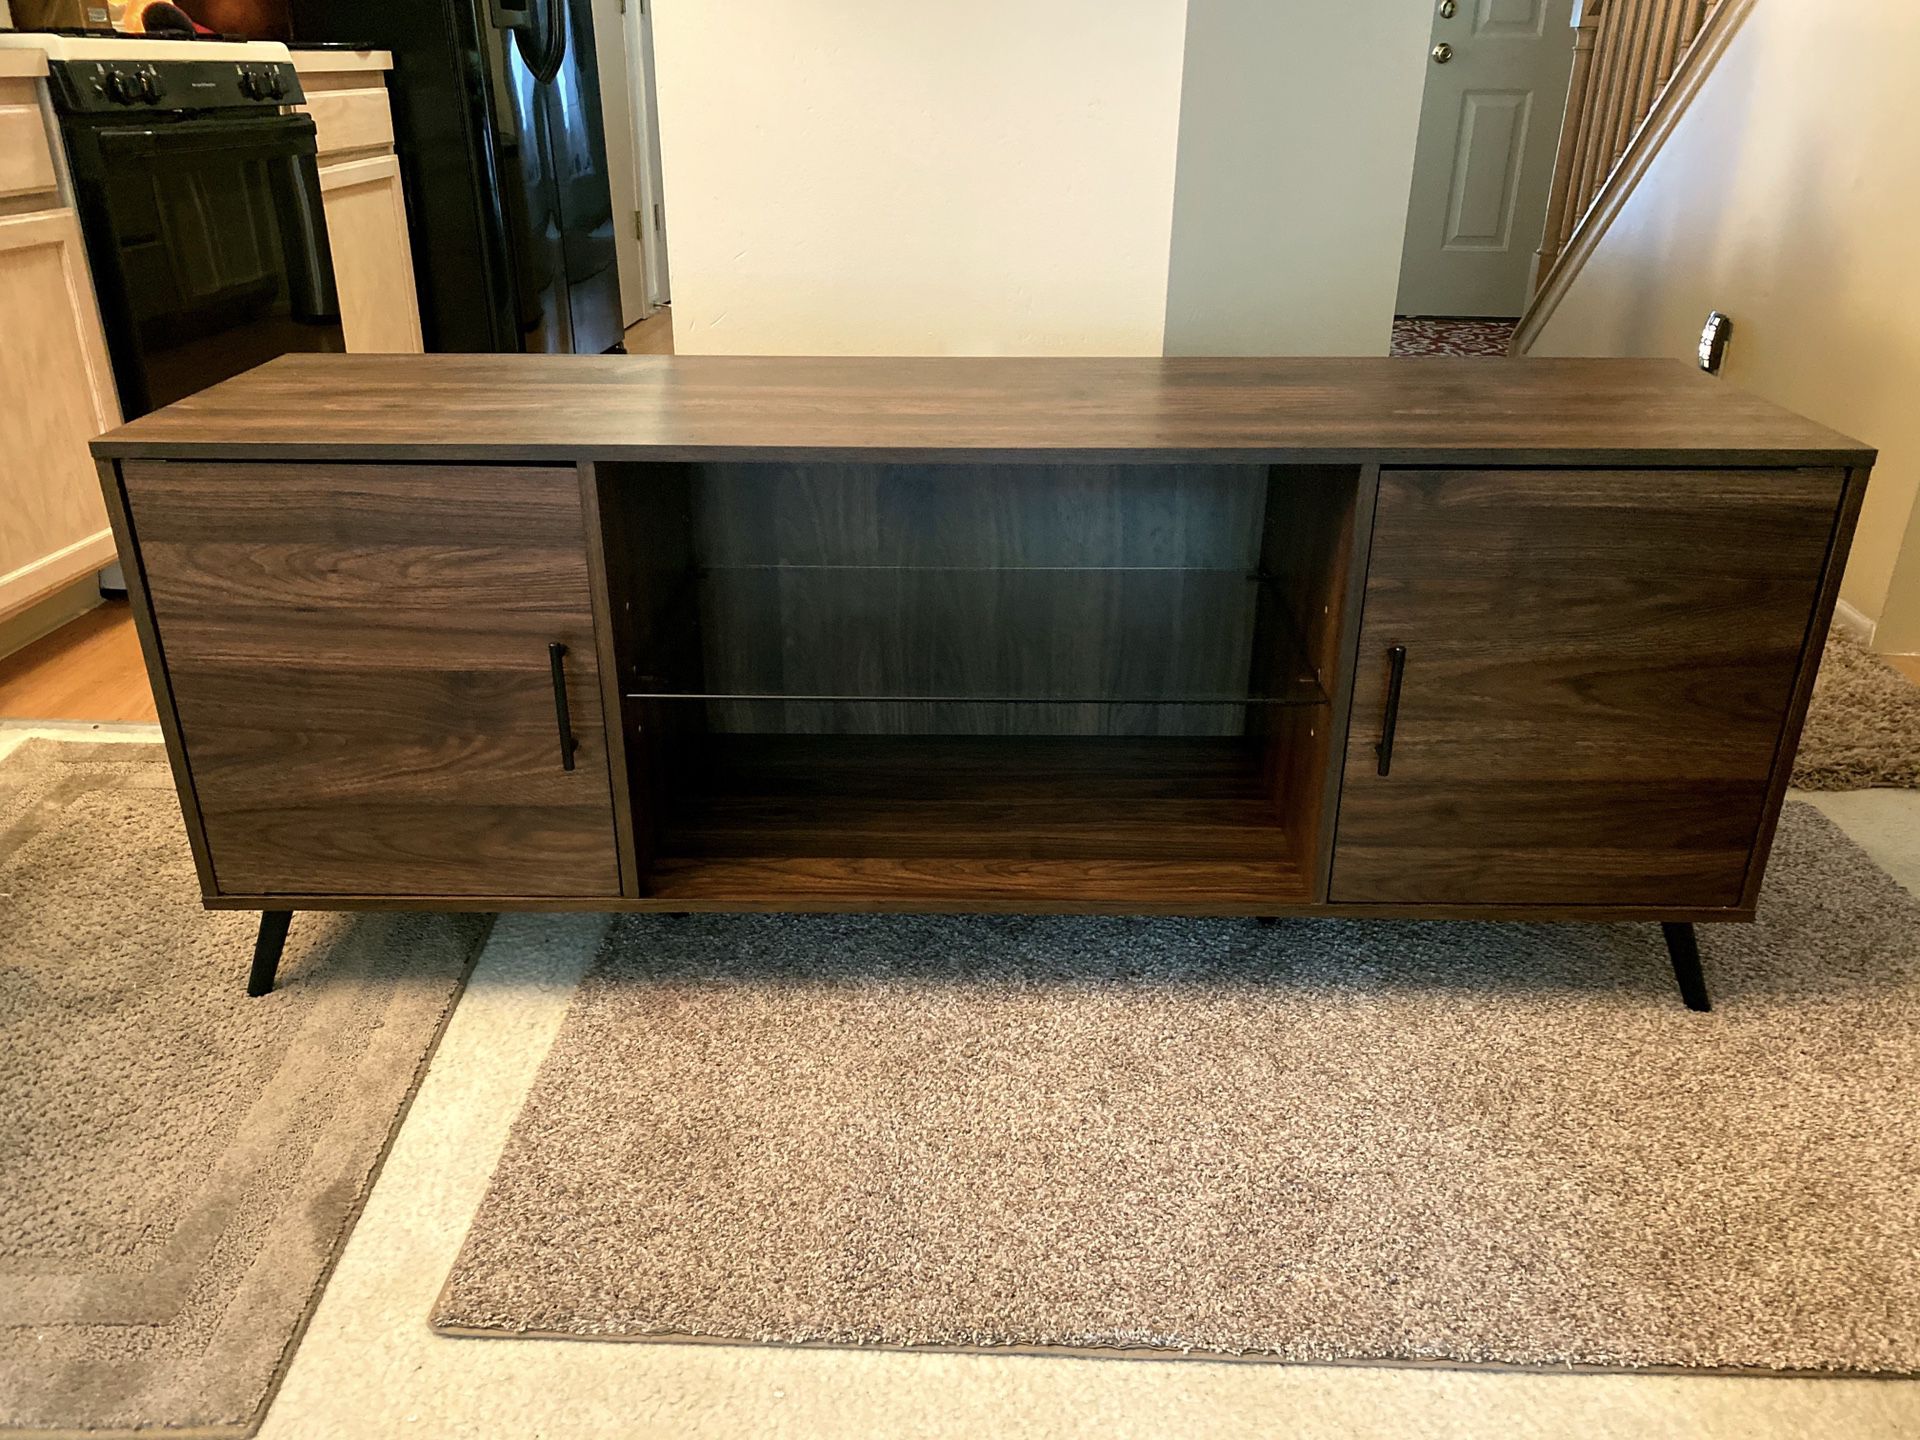 *BRAND NEW* WALKER EDISON MID CENTURY 60” TV STAND . RETAILS AT $268